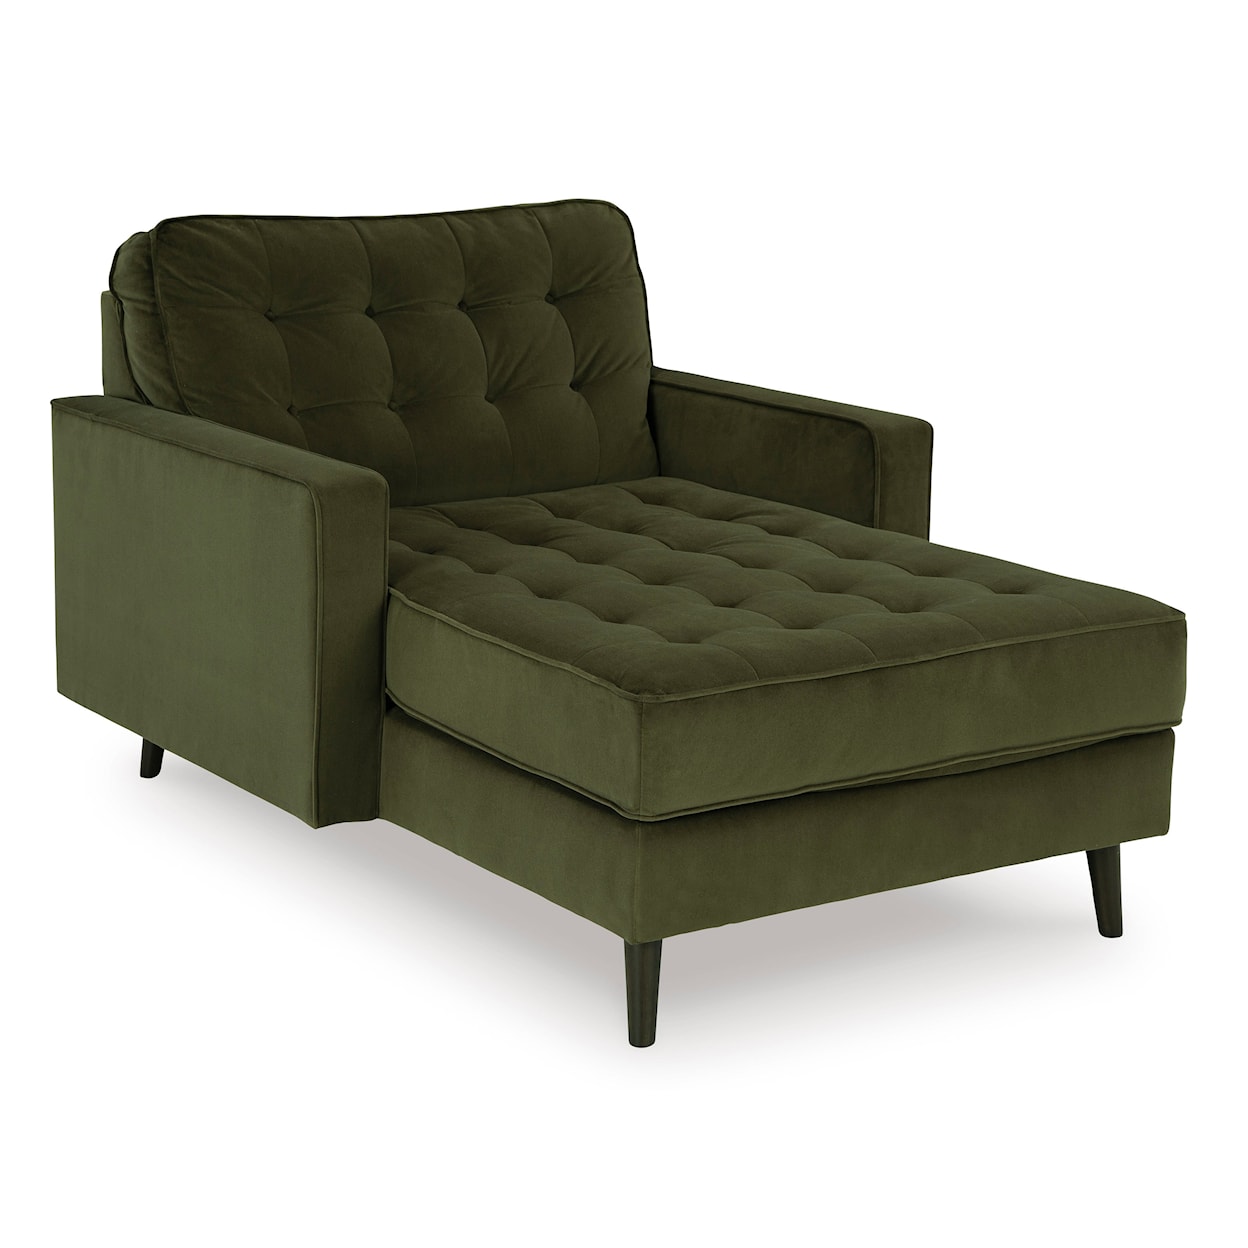 Signature Design by Ashley Furniture Reveon Lakes Chaise